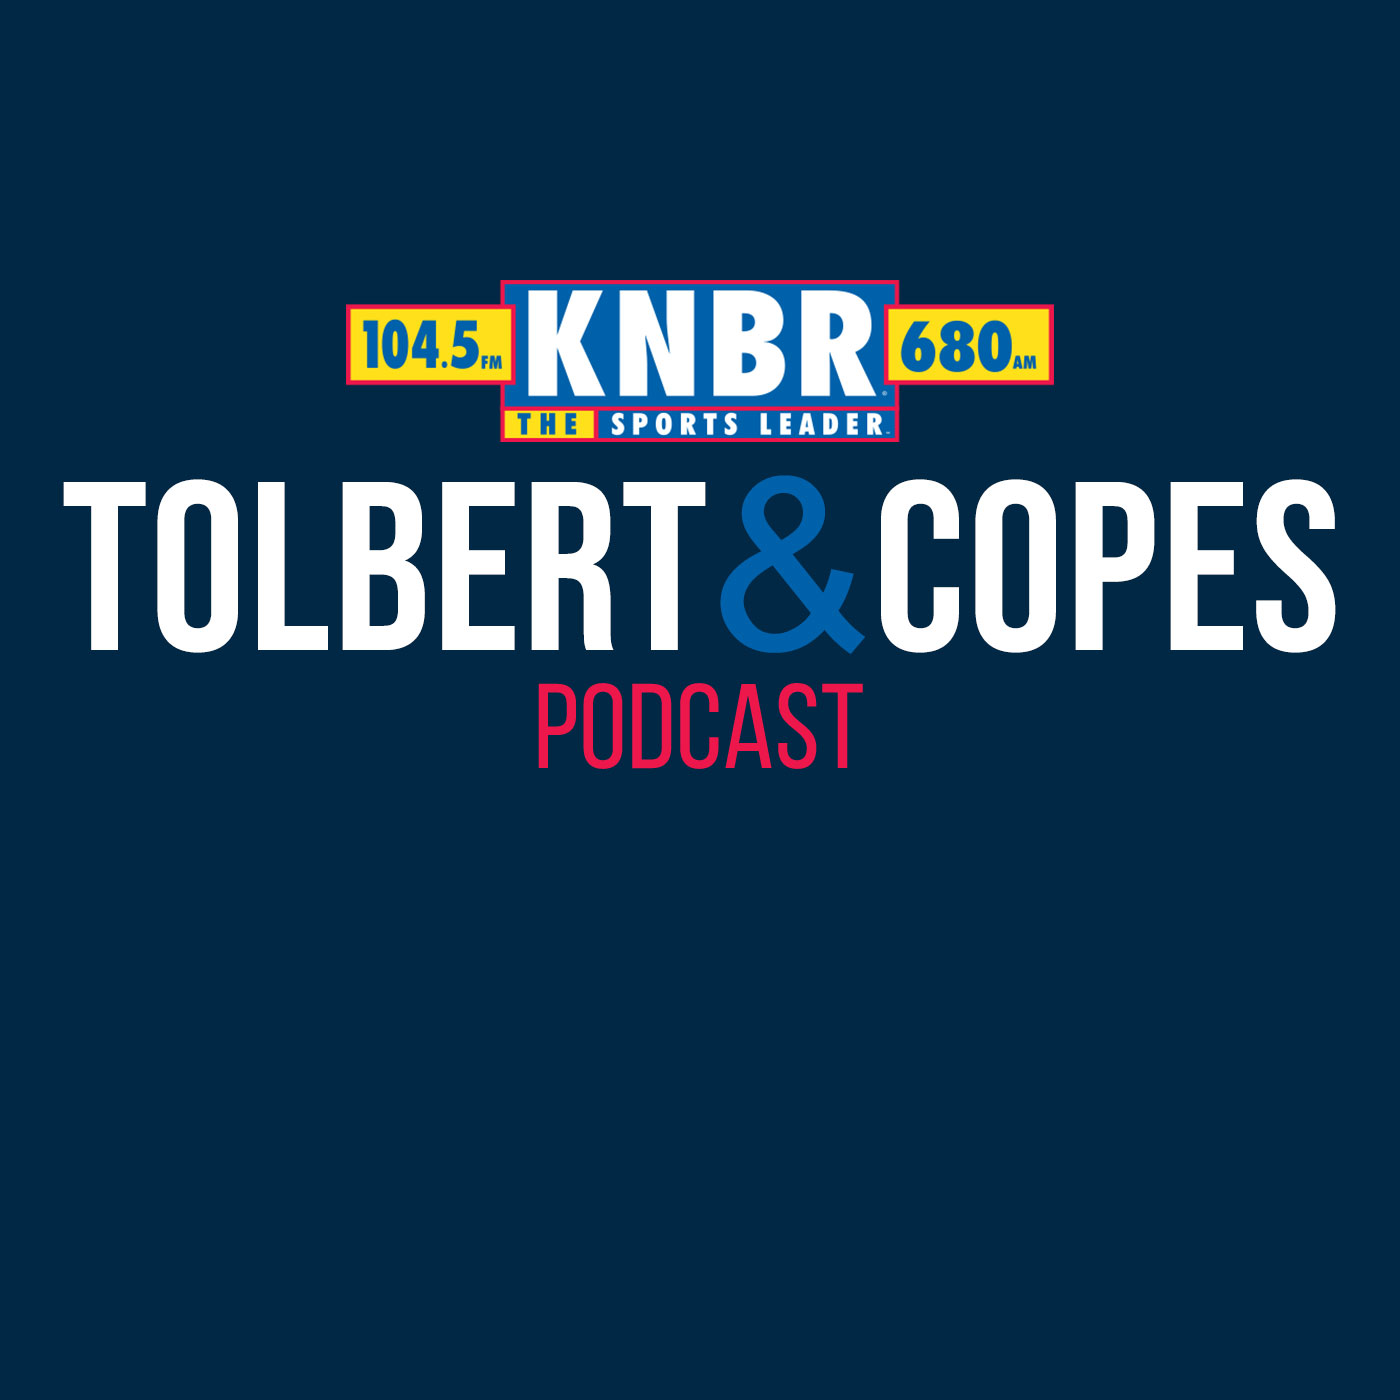 7-19 Tolbert & Copes Hour 1: The Giants return tonight, which MLB front offices have the most pressure, and J.T. Snow stops by